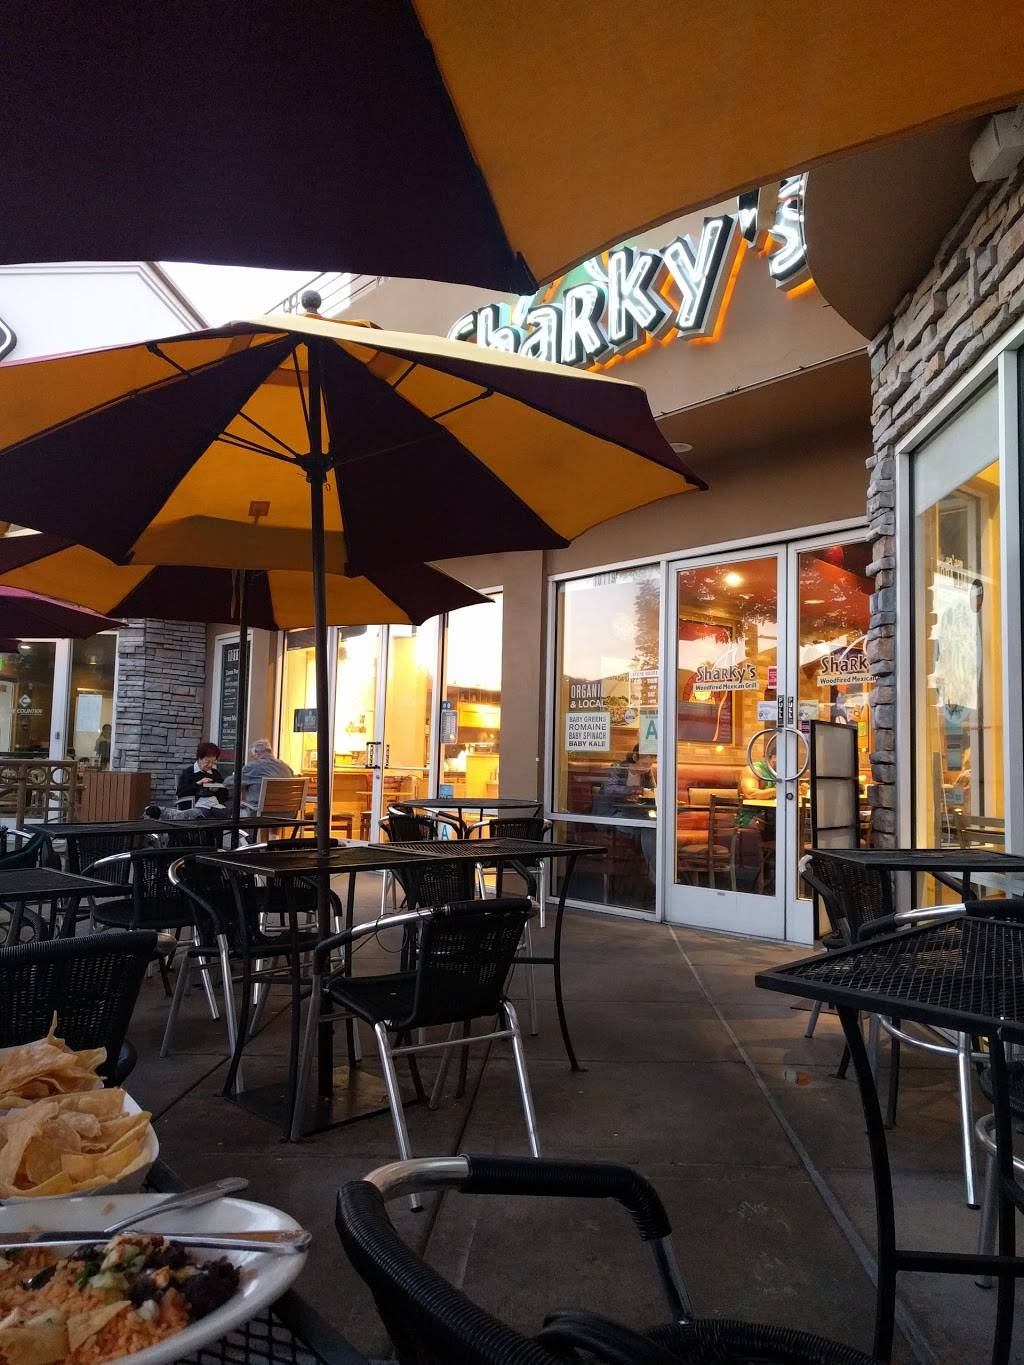 Sharkys Woodfired Mexican Grill | restaurant | 10119 W Riverside Dr, Toluca Lake, CA 91602, USA | 8185081900 OR +1 818-508-1900